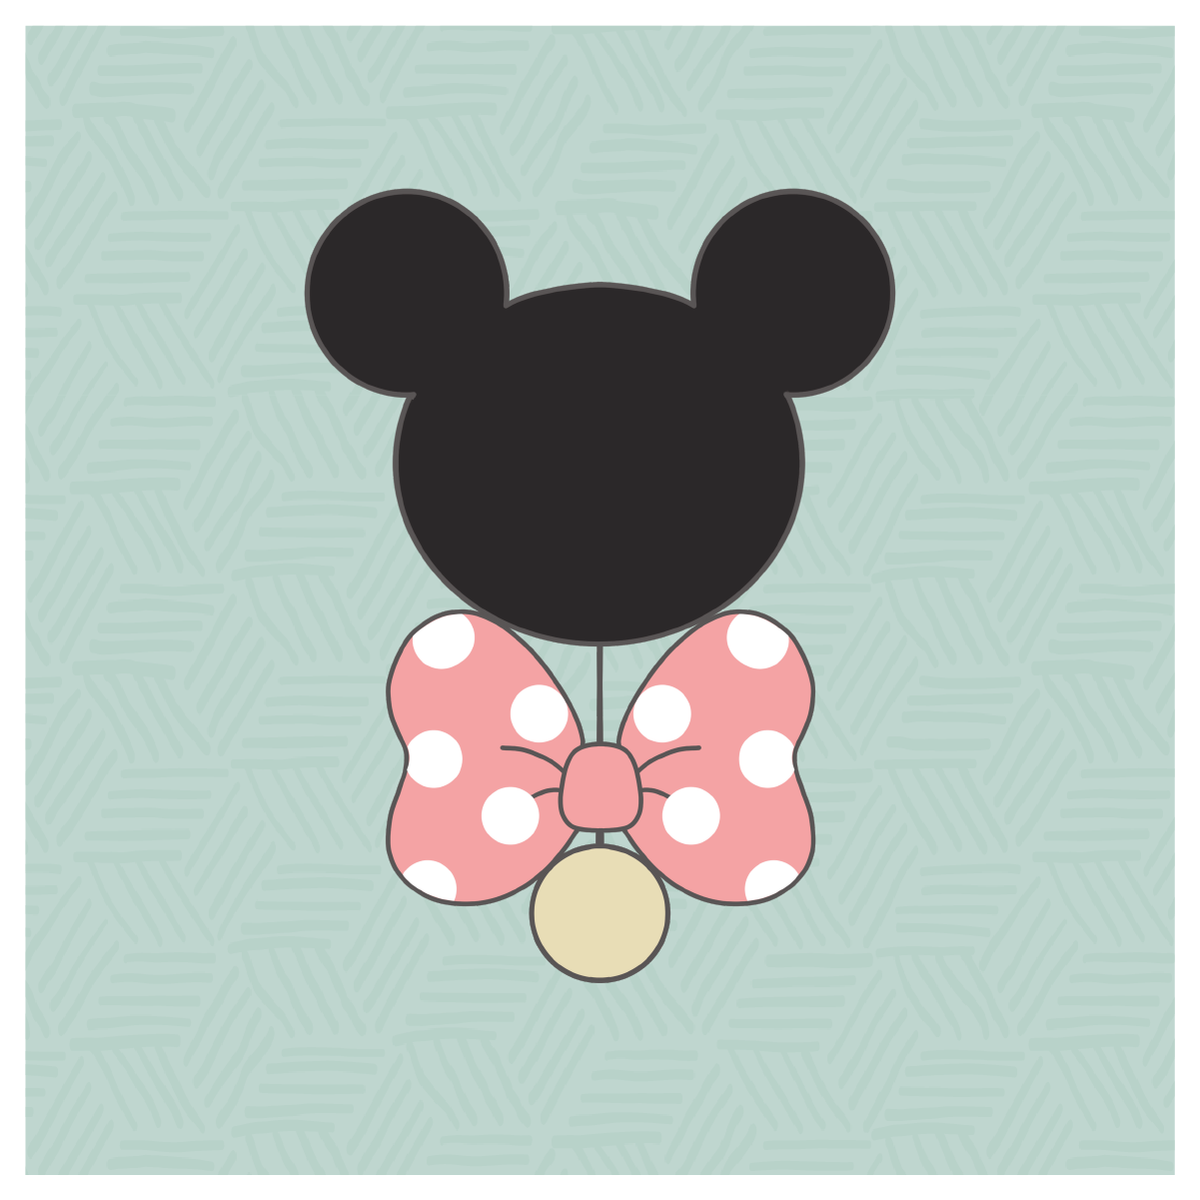 Kawaii Mouse Rattle 3 Cookie Cutter